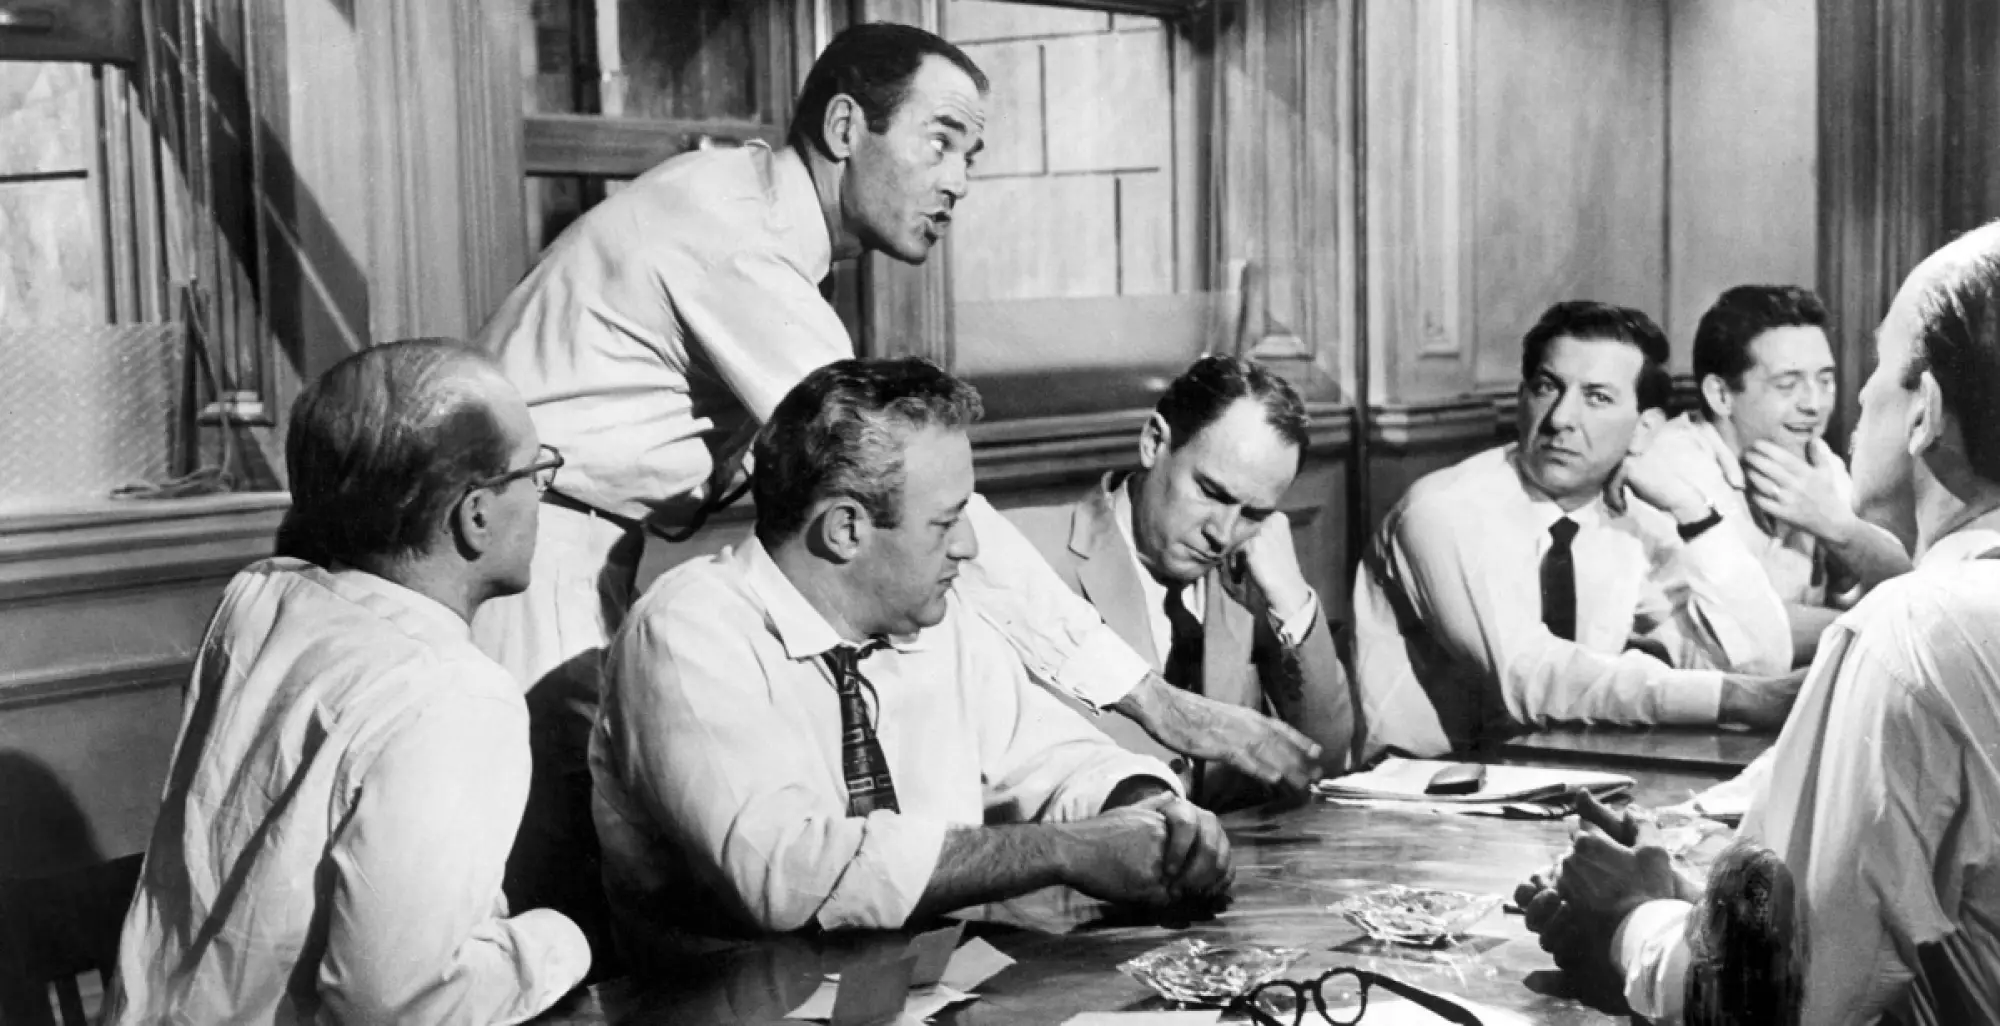 Jurors deliberate in '12 Angry Men'